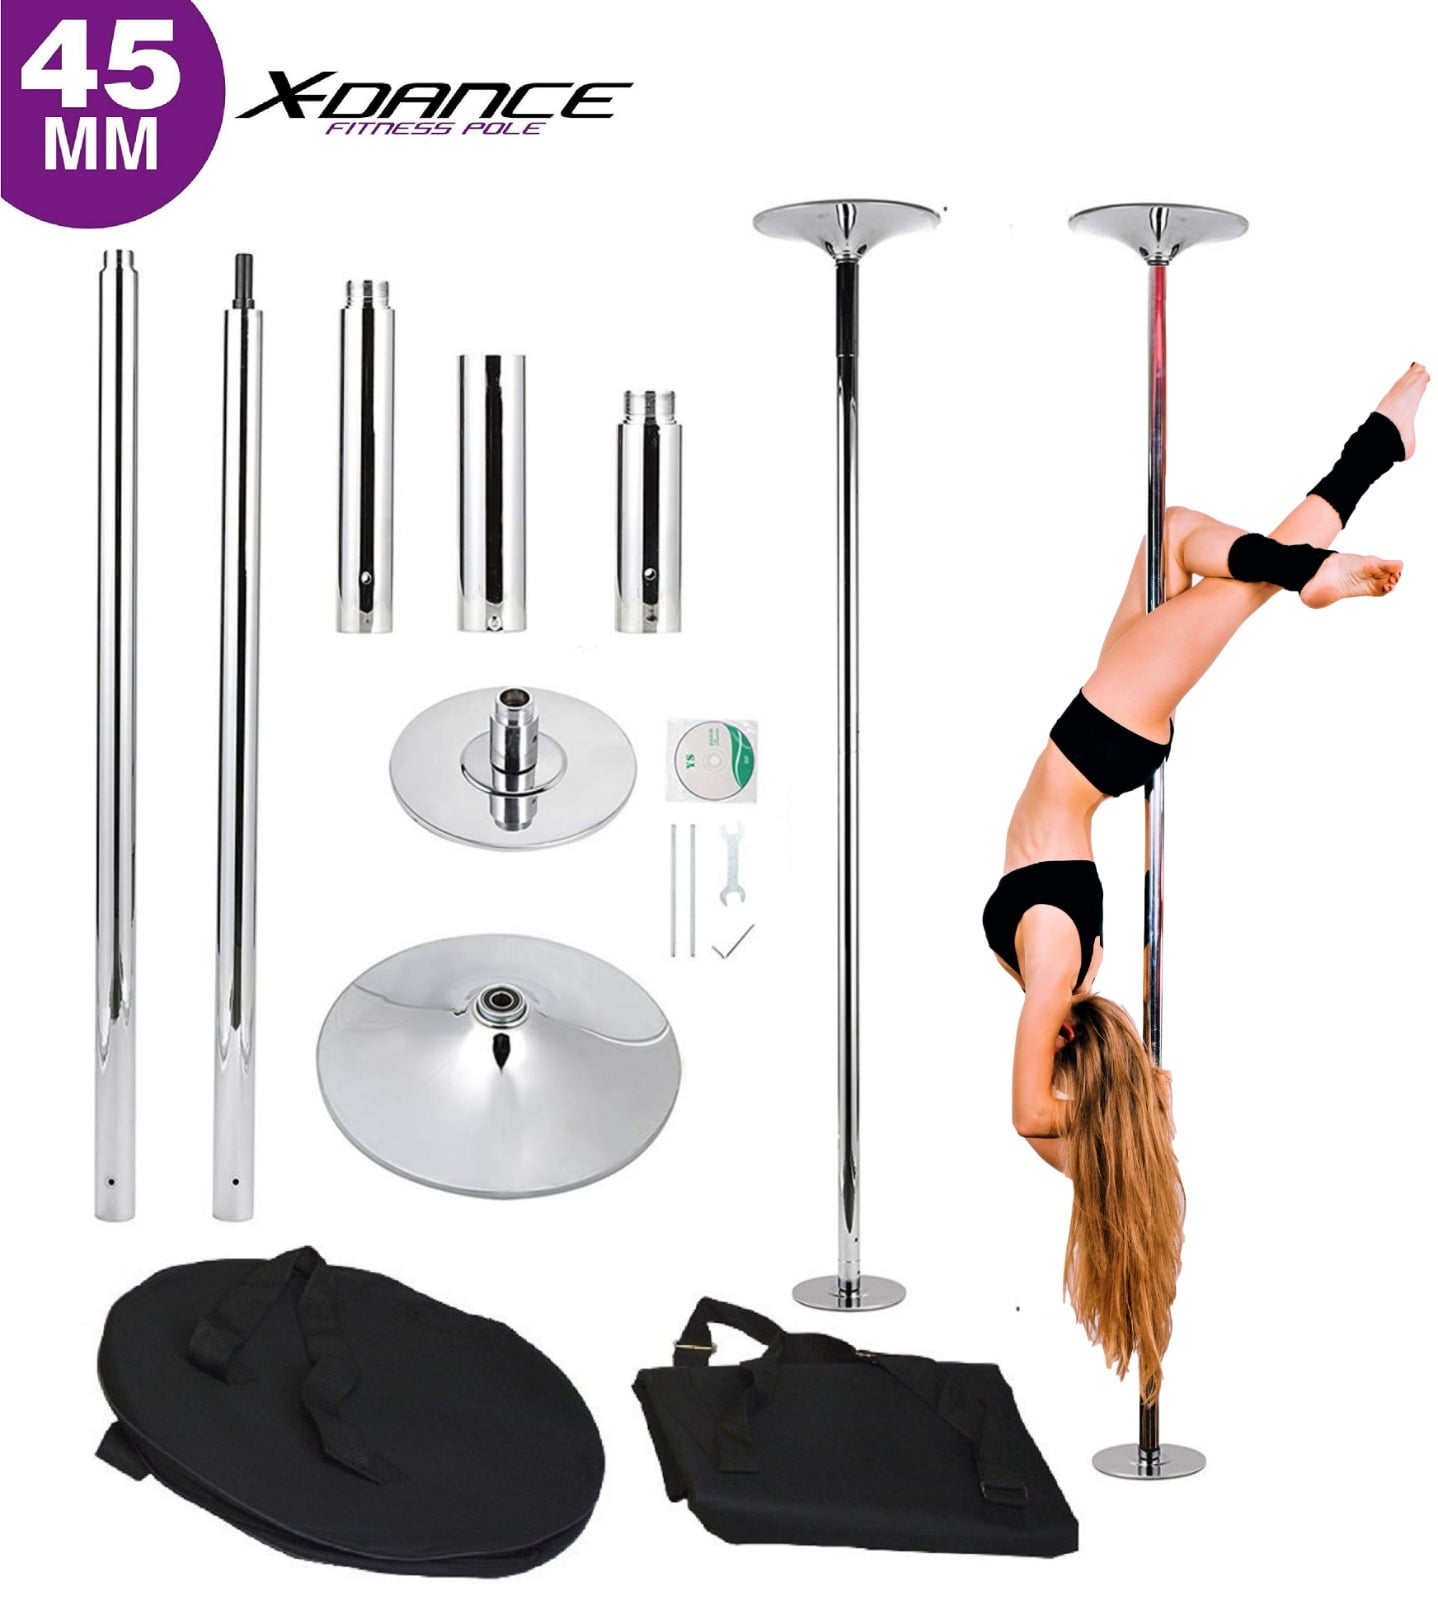 PRIOR FITNESS 45mm Removable Dance Pole Set Spinning Pole Dance Portable Static Fitness Dancing Pole Kit for Exercise Club Party Pub Home Silver-Flying Pole 